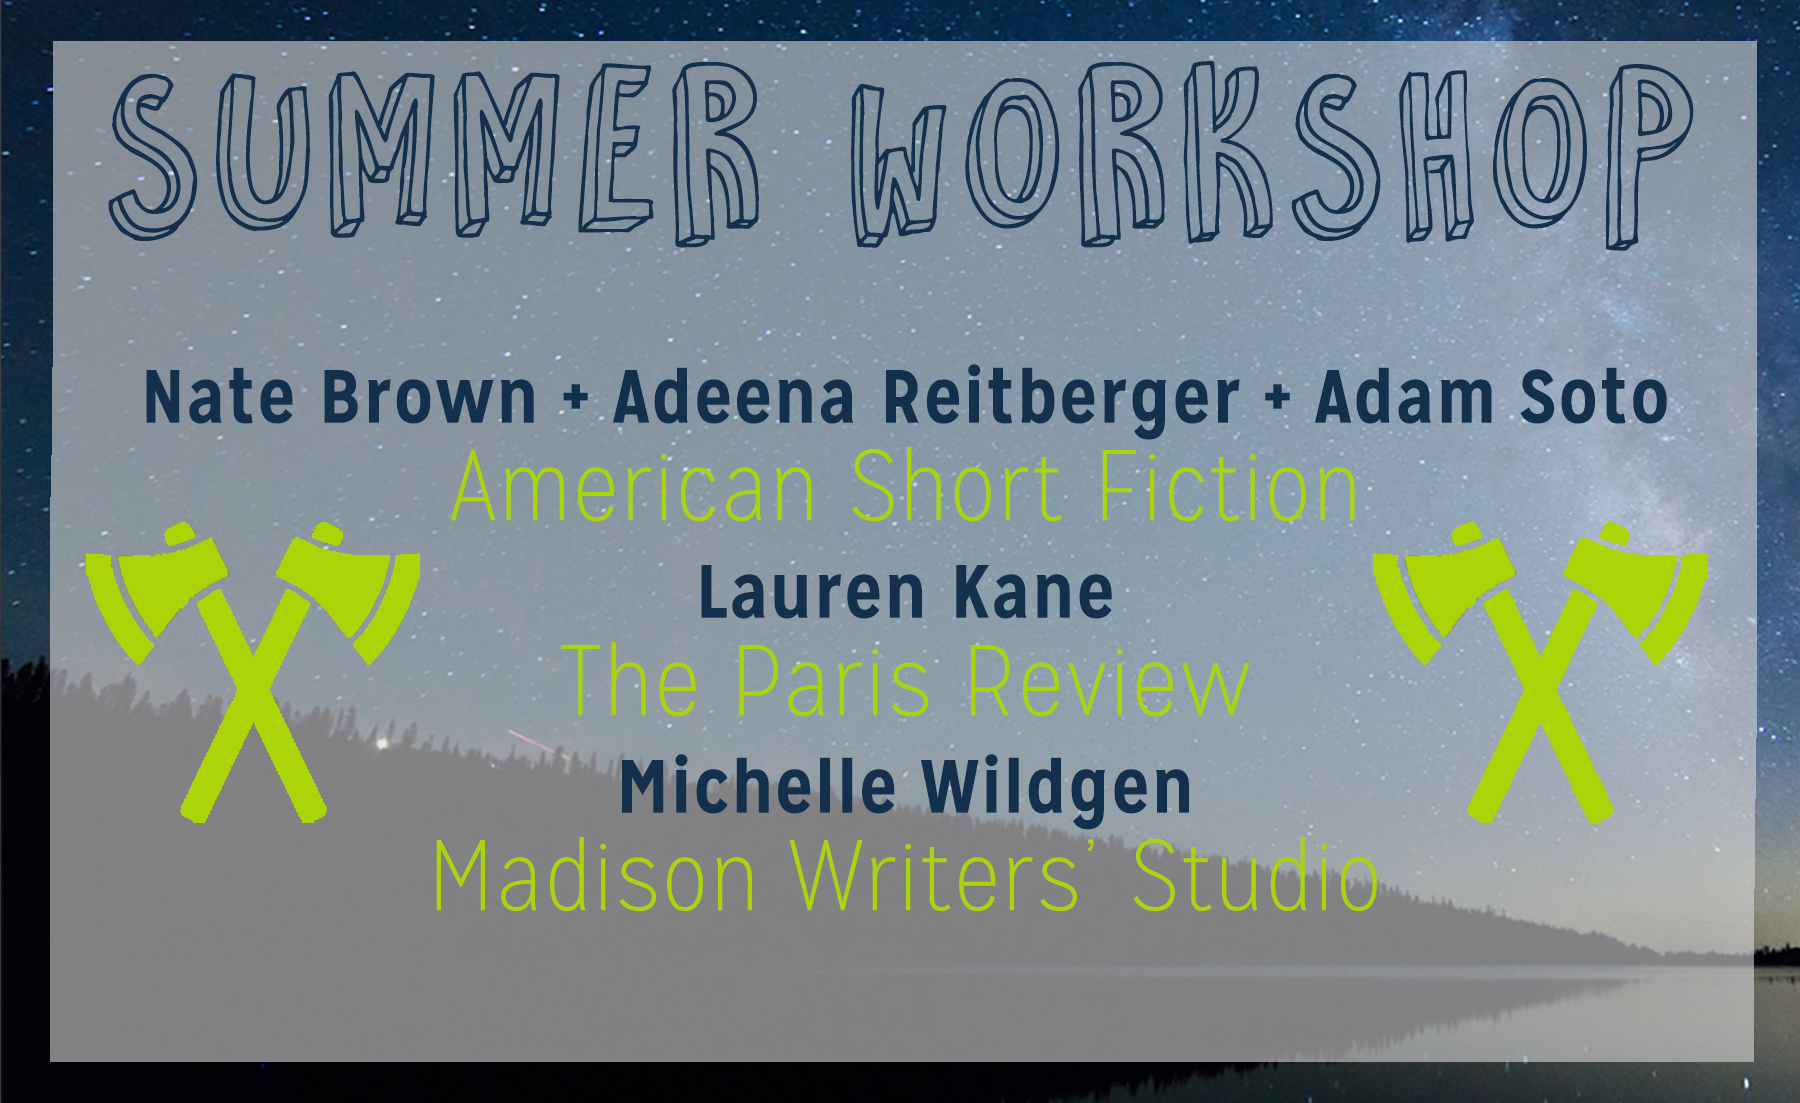 The Masters Review 2020 Summer Workshop Editors